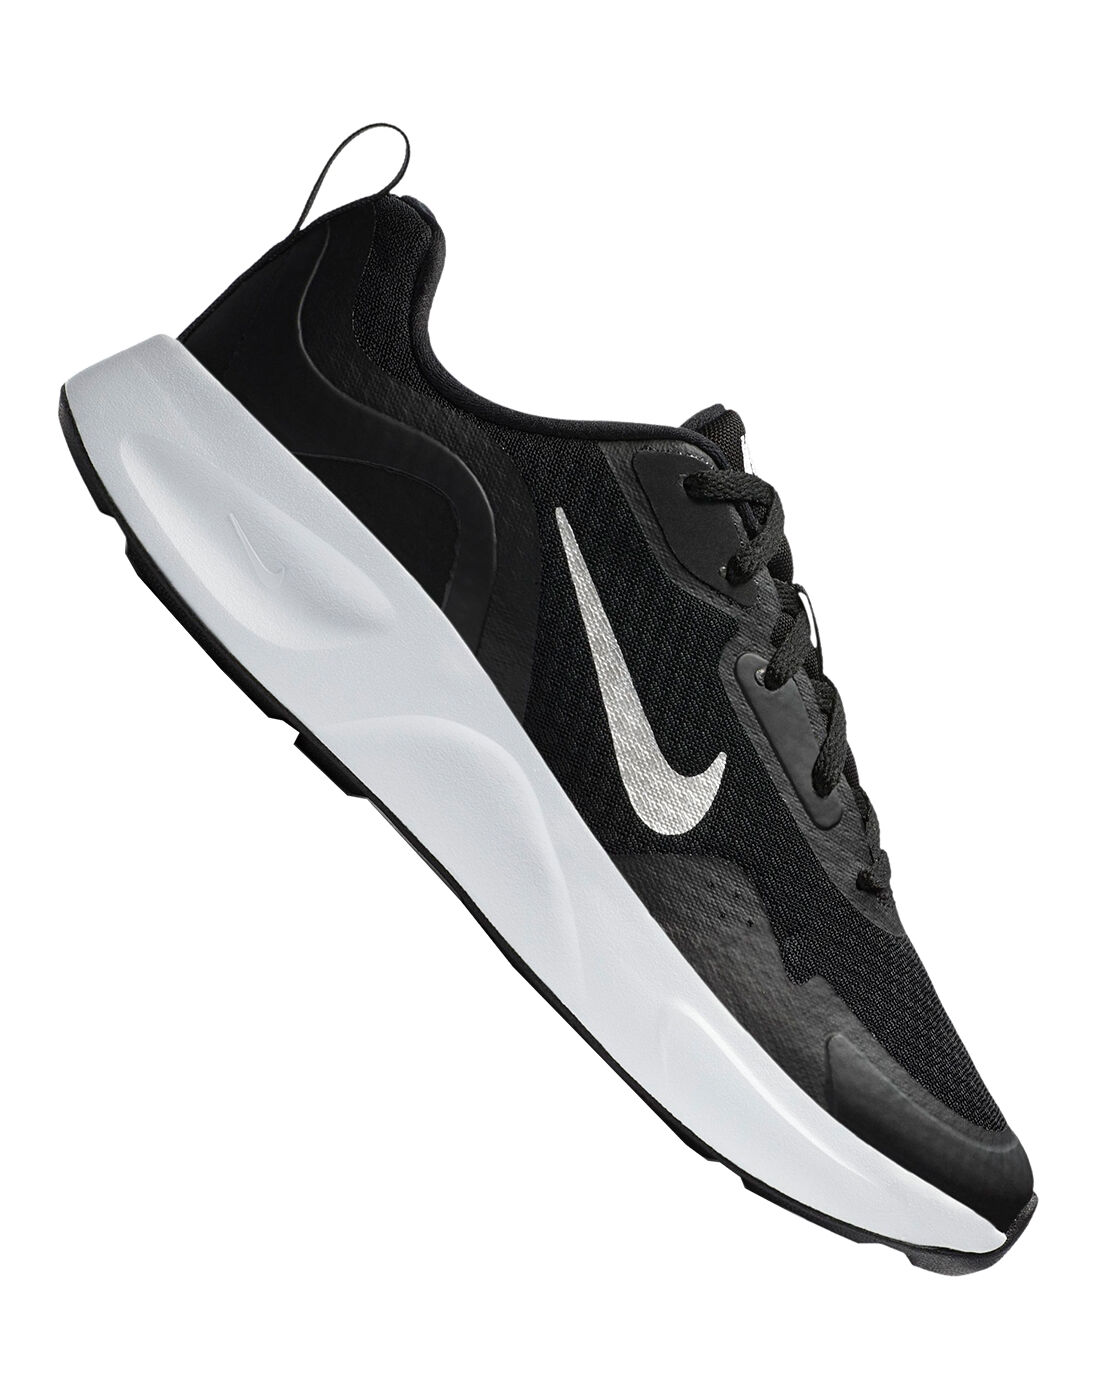 nike shoes on sale jcpenney